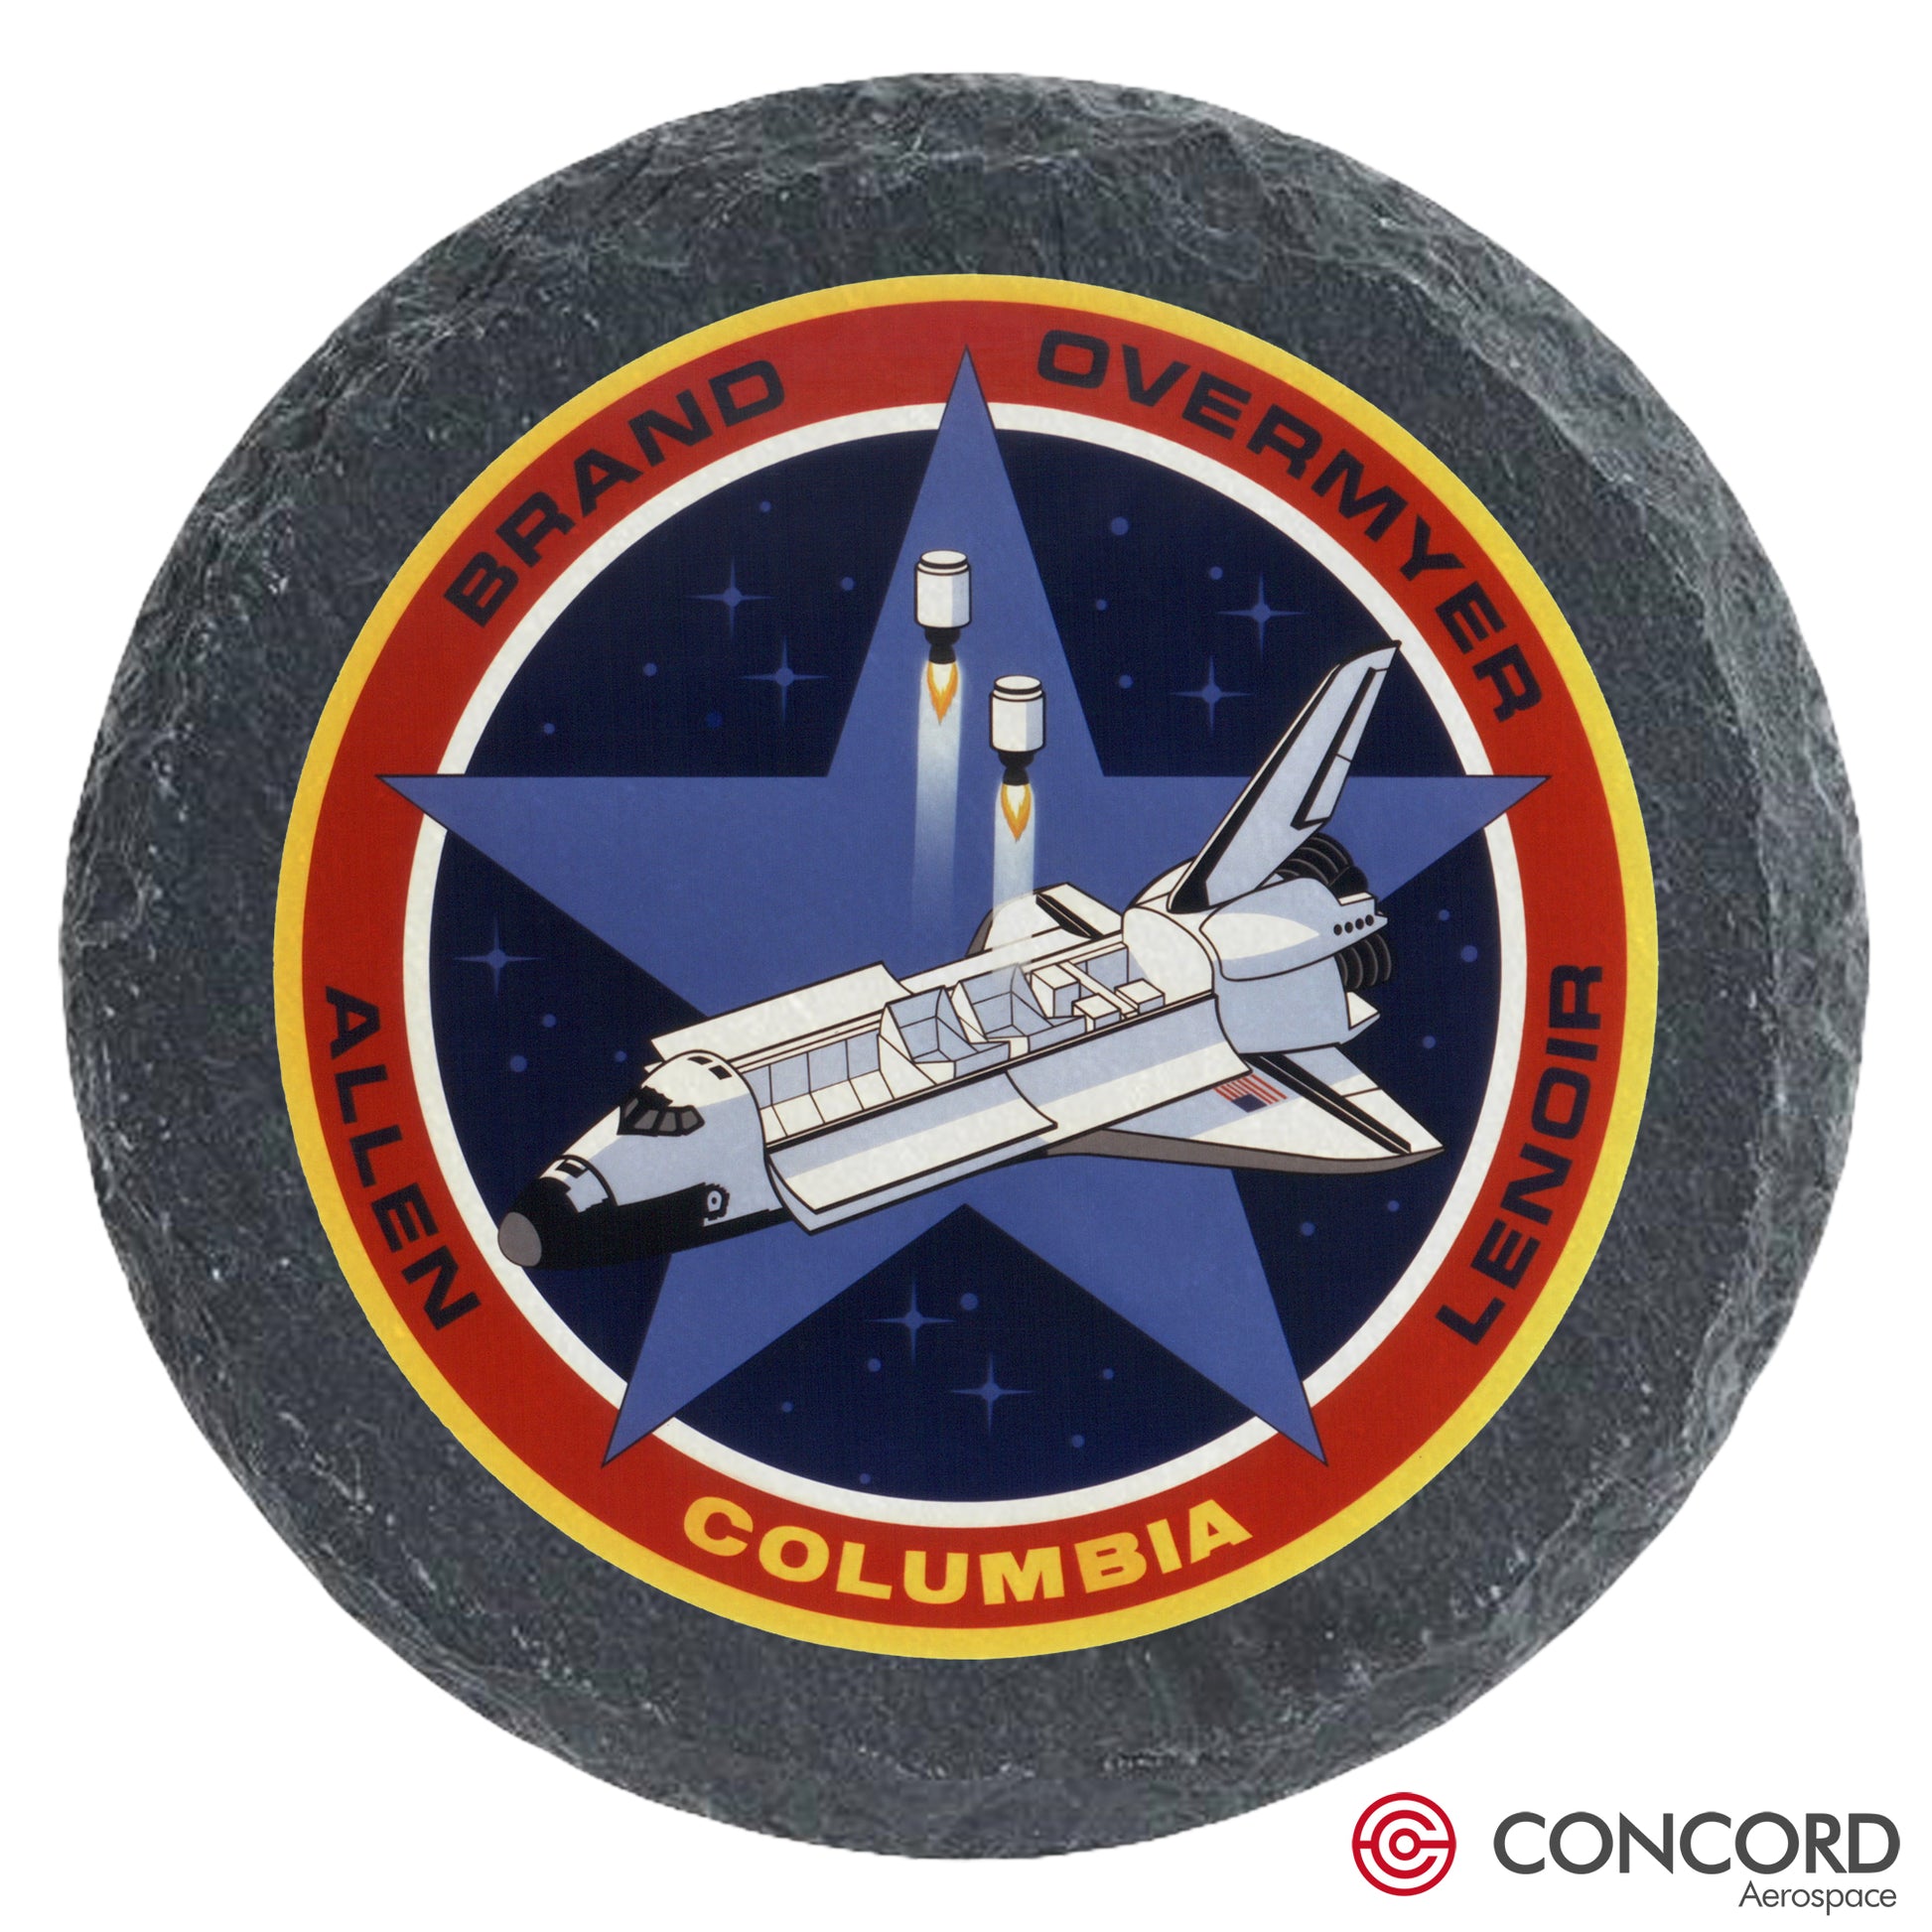 STS - 5 SPACE SHUTTLE - SLATE COASTER - Concord Aerospace Concord Aerospace Concord Aerospace Coasters